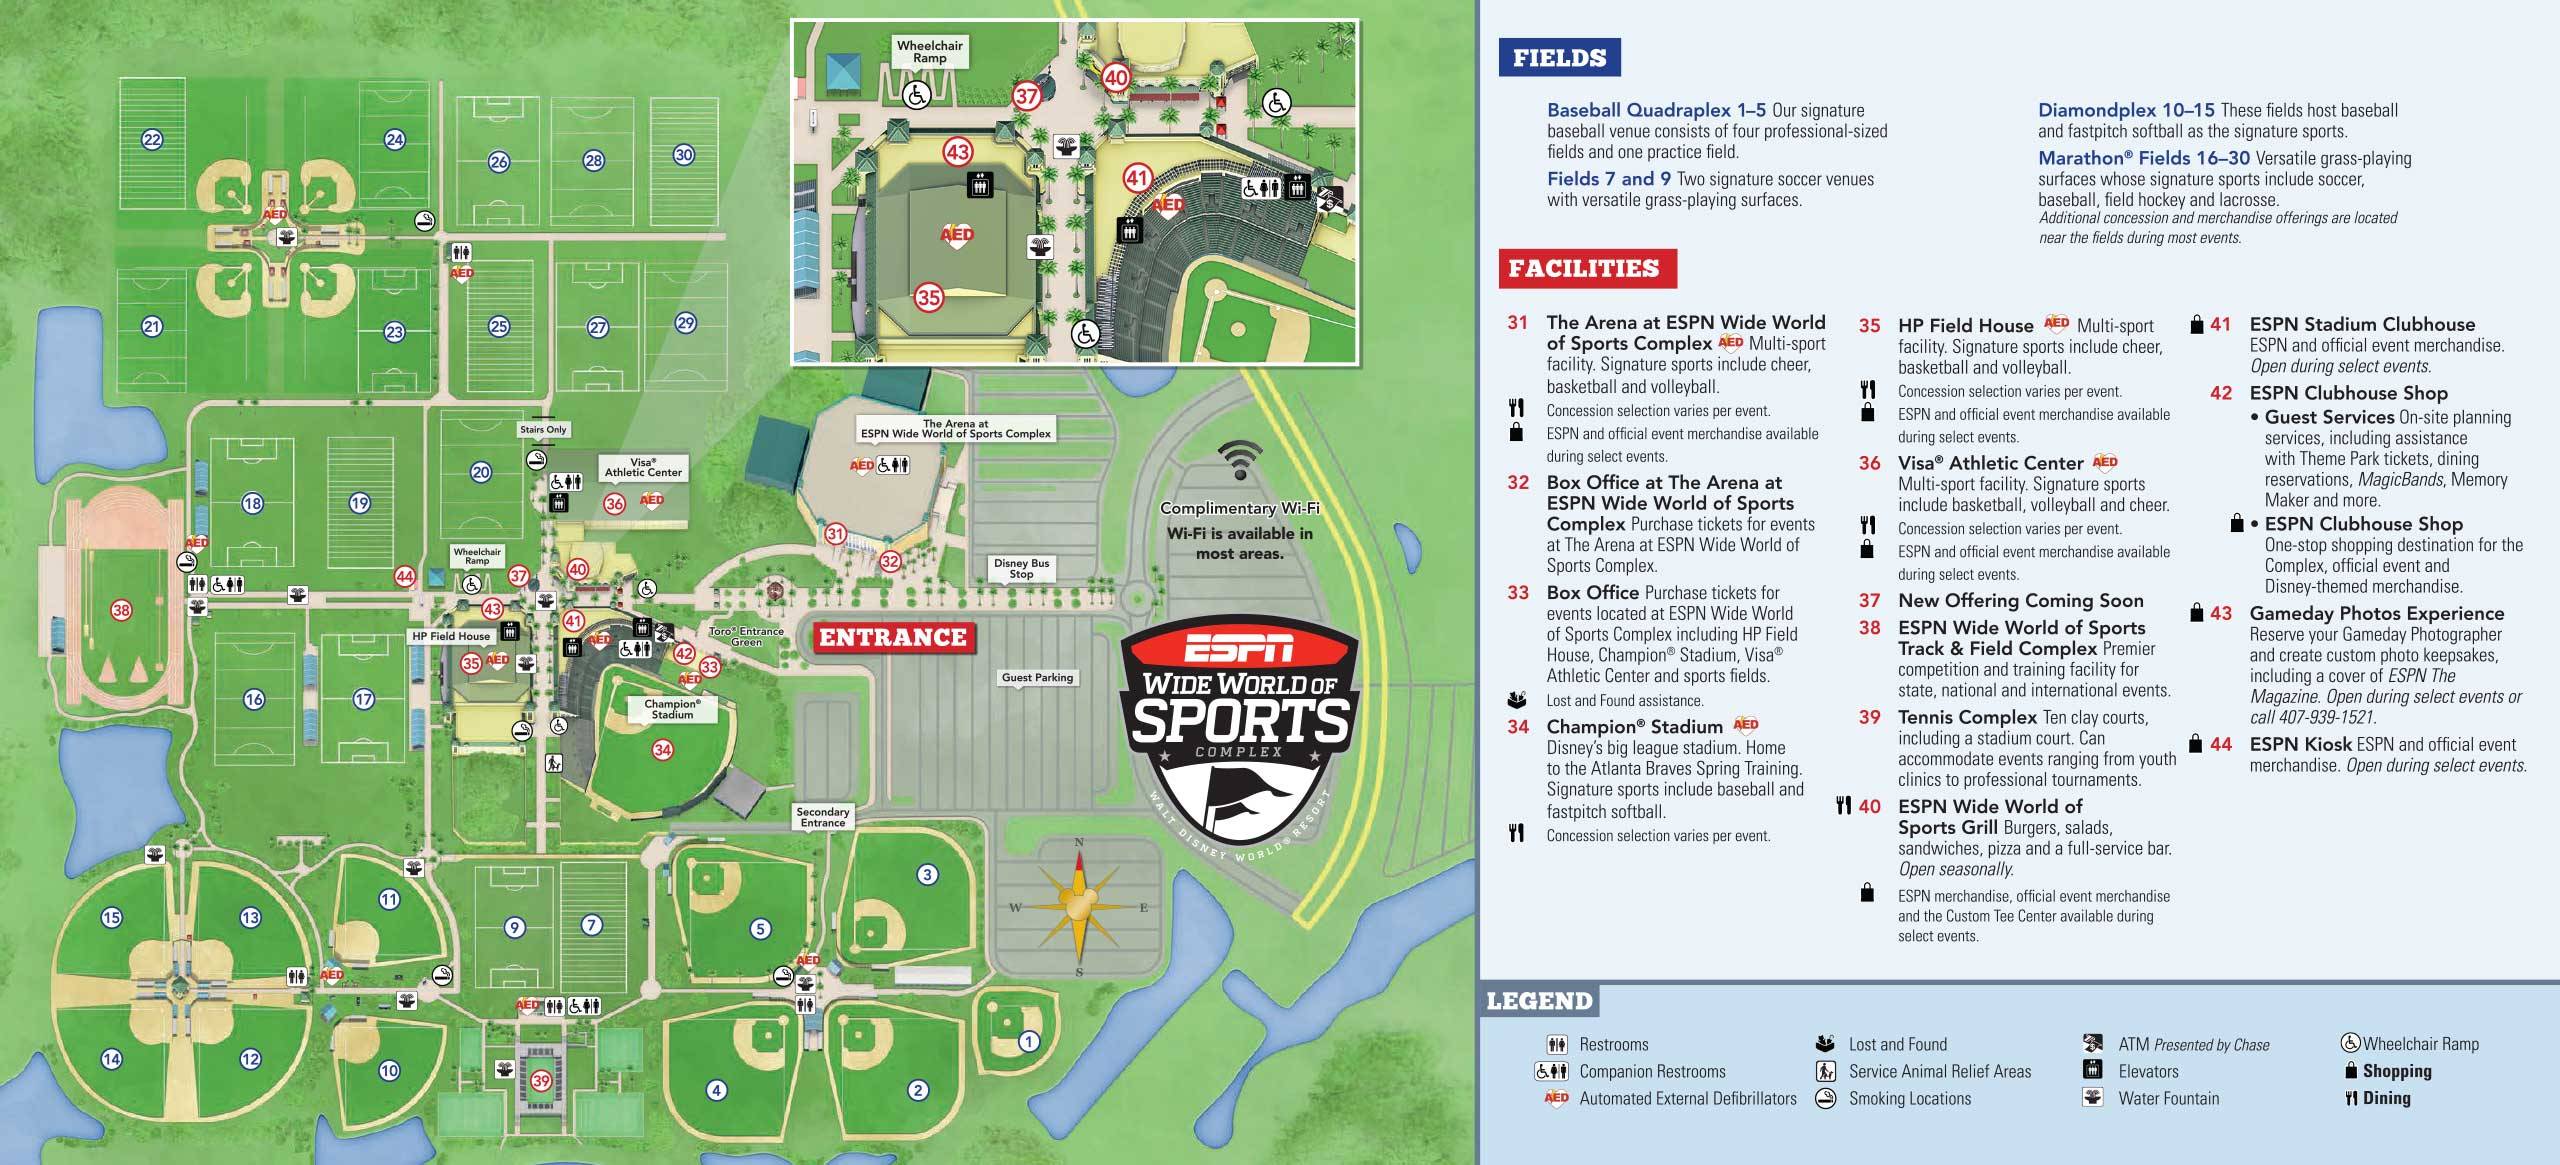 ESPN Wide World of Sports Guide Map January 2019 - Back